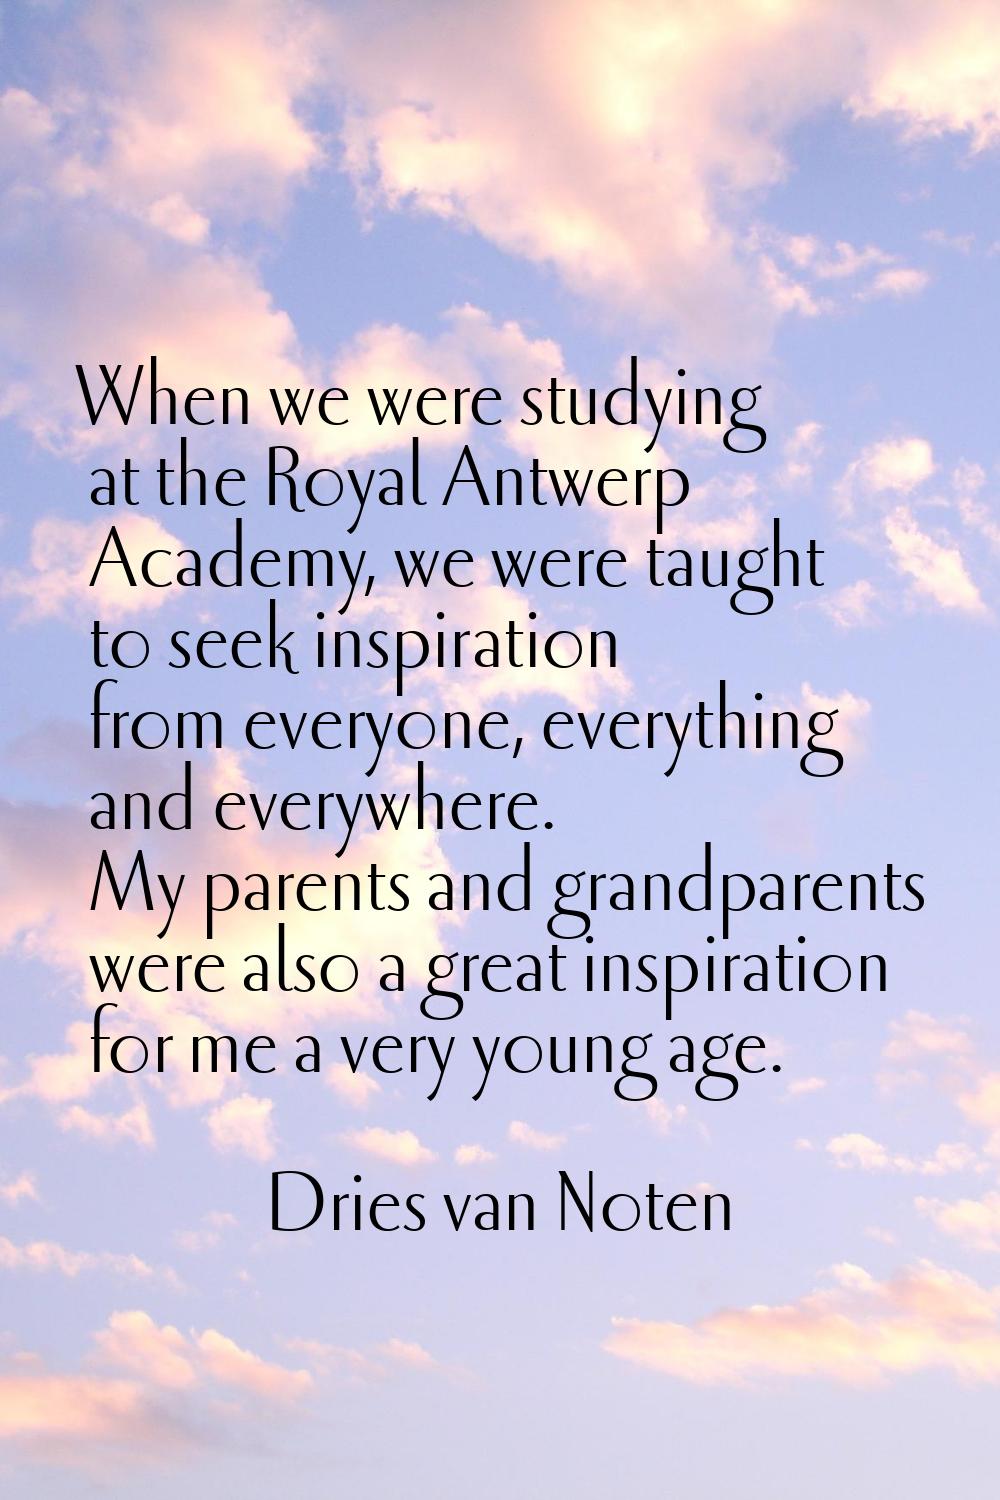 When we were studying at the Royal Antwerp Academy, we were taught to seek inspiration from everyon